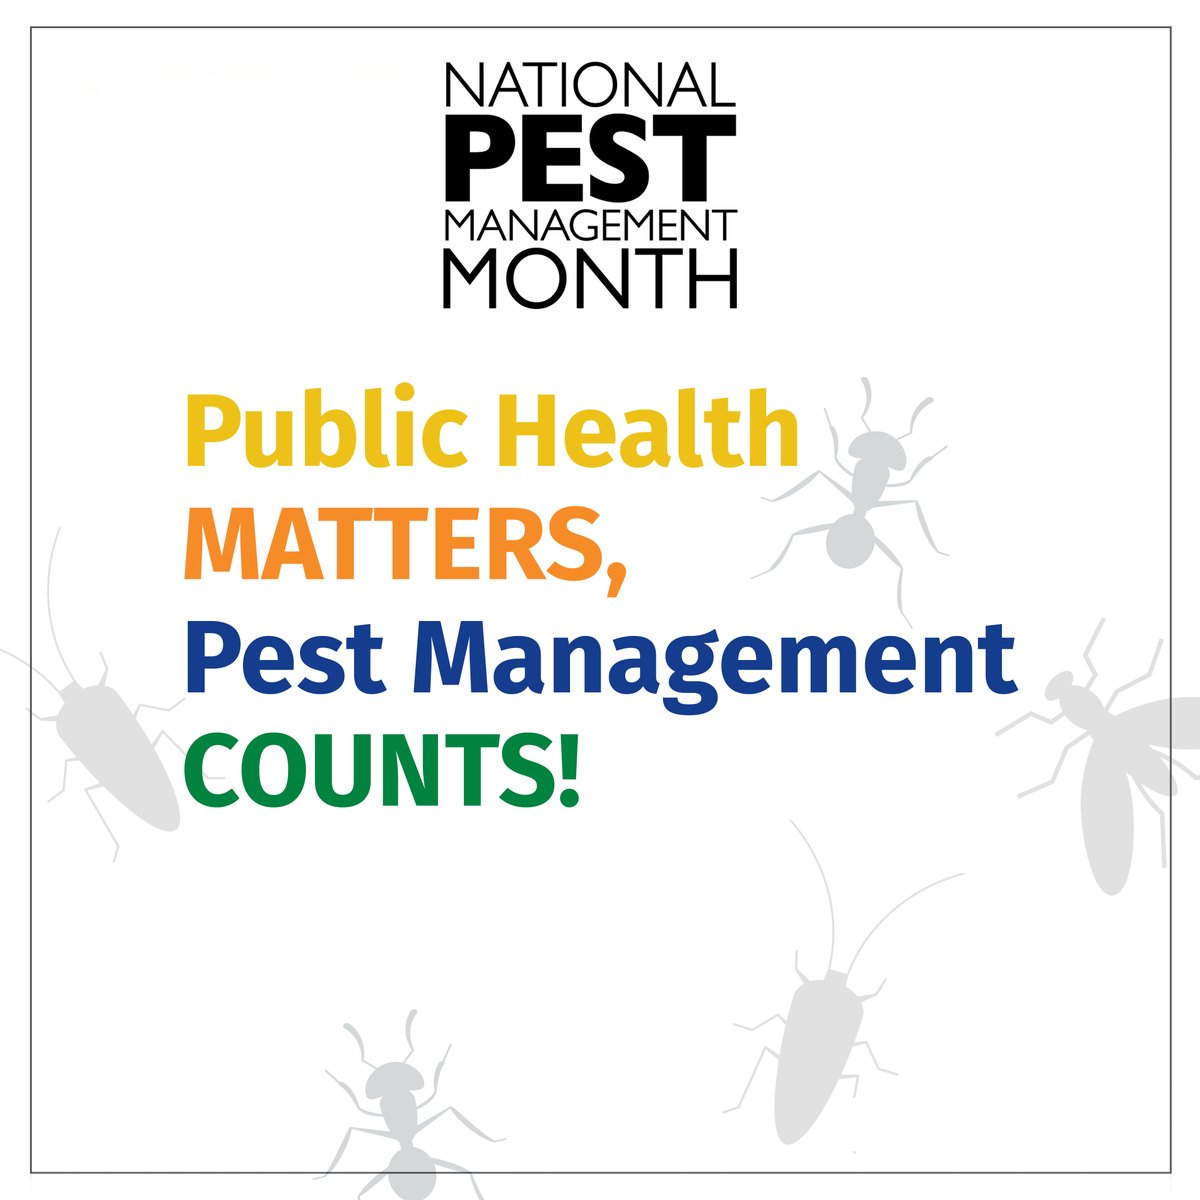 As we close out National Pest Management Month this April, we want to thank and recognize again all pest management professionals who ensure a safe environment for individuals and communities from public health pests. #NPMM and #PestManagementHeroes